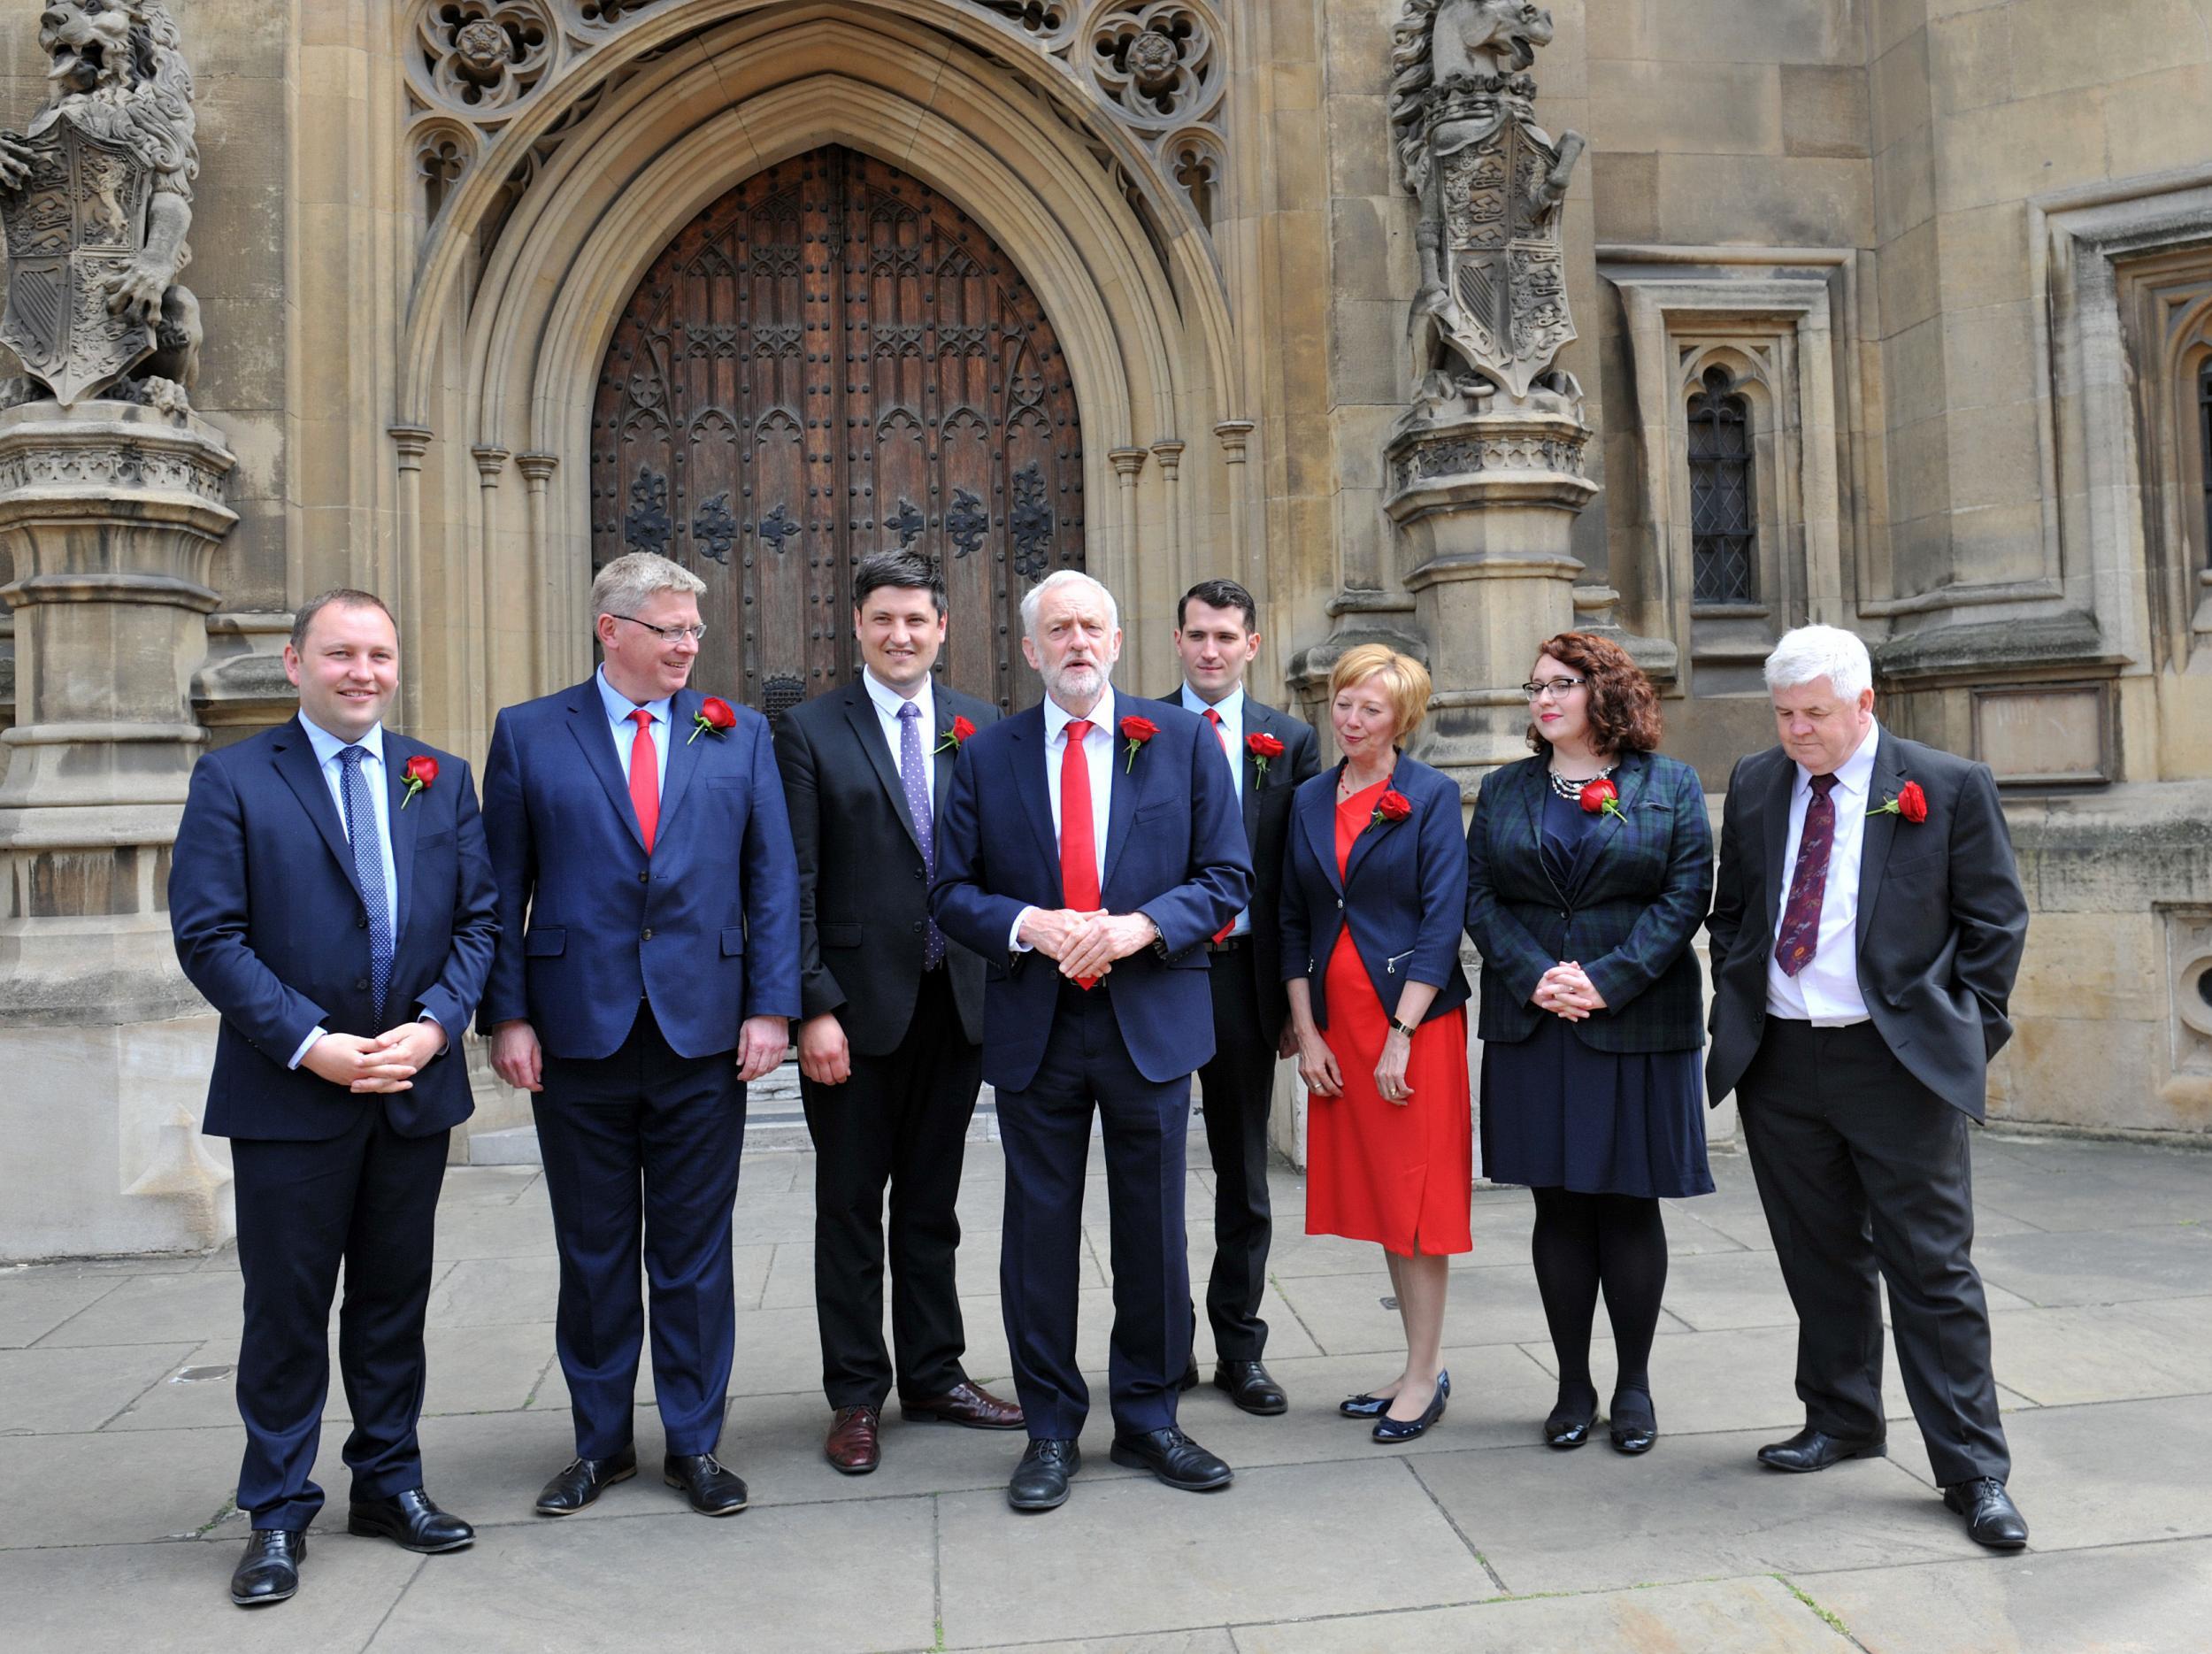 Jeremy Corbyn welcomes Scottish Labour MPs to Parliament after the party regained seats north of the border